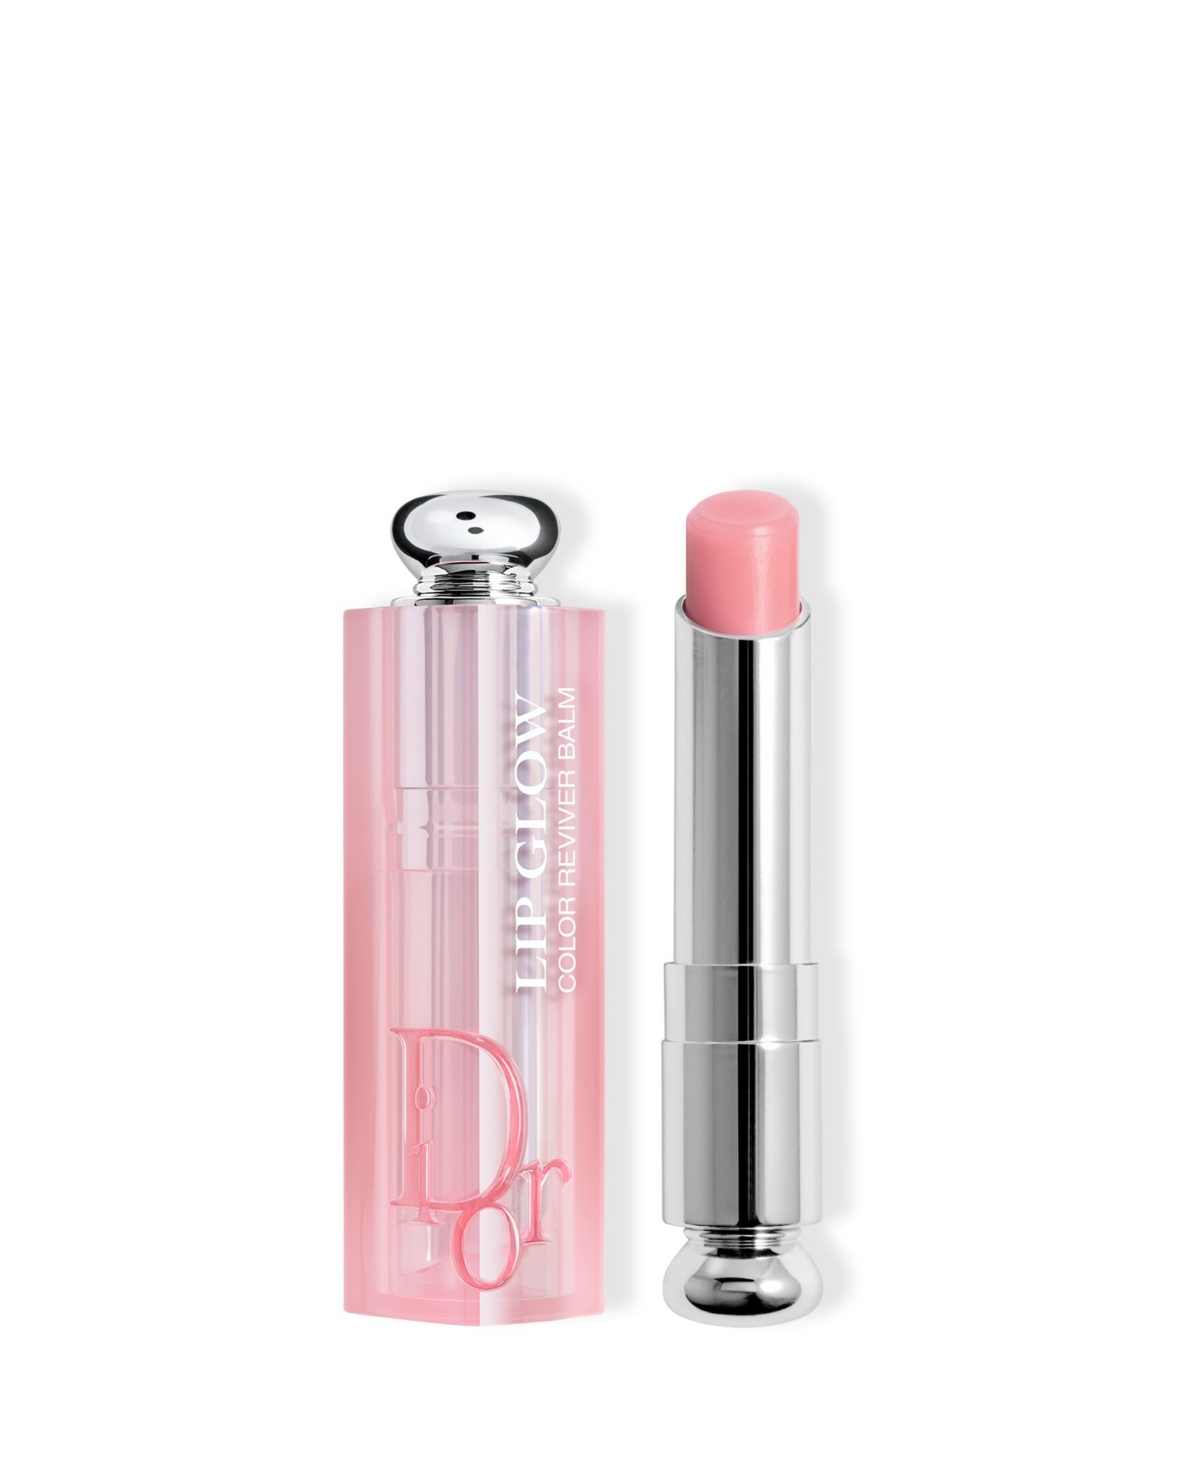 Dior Addict Lip Glow Balm In Glow  Pink (a Delicate Pink)